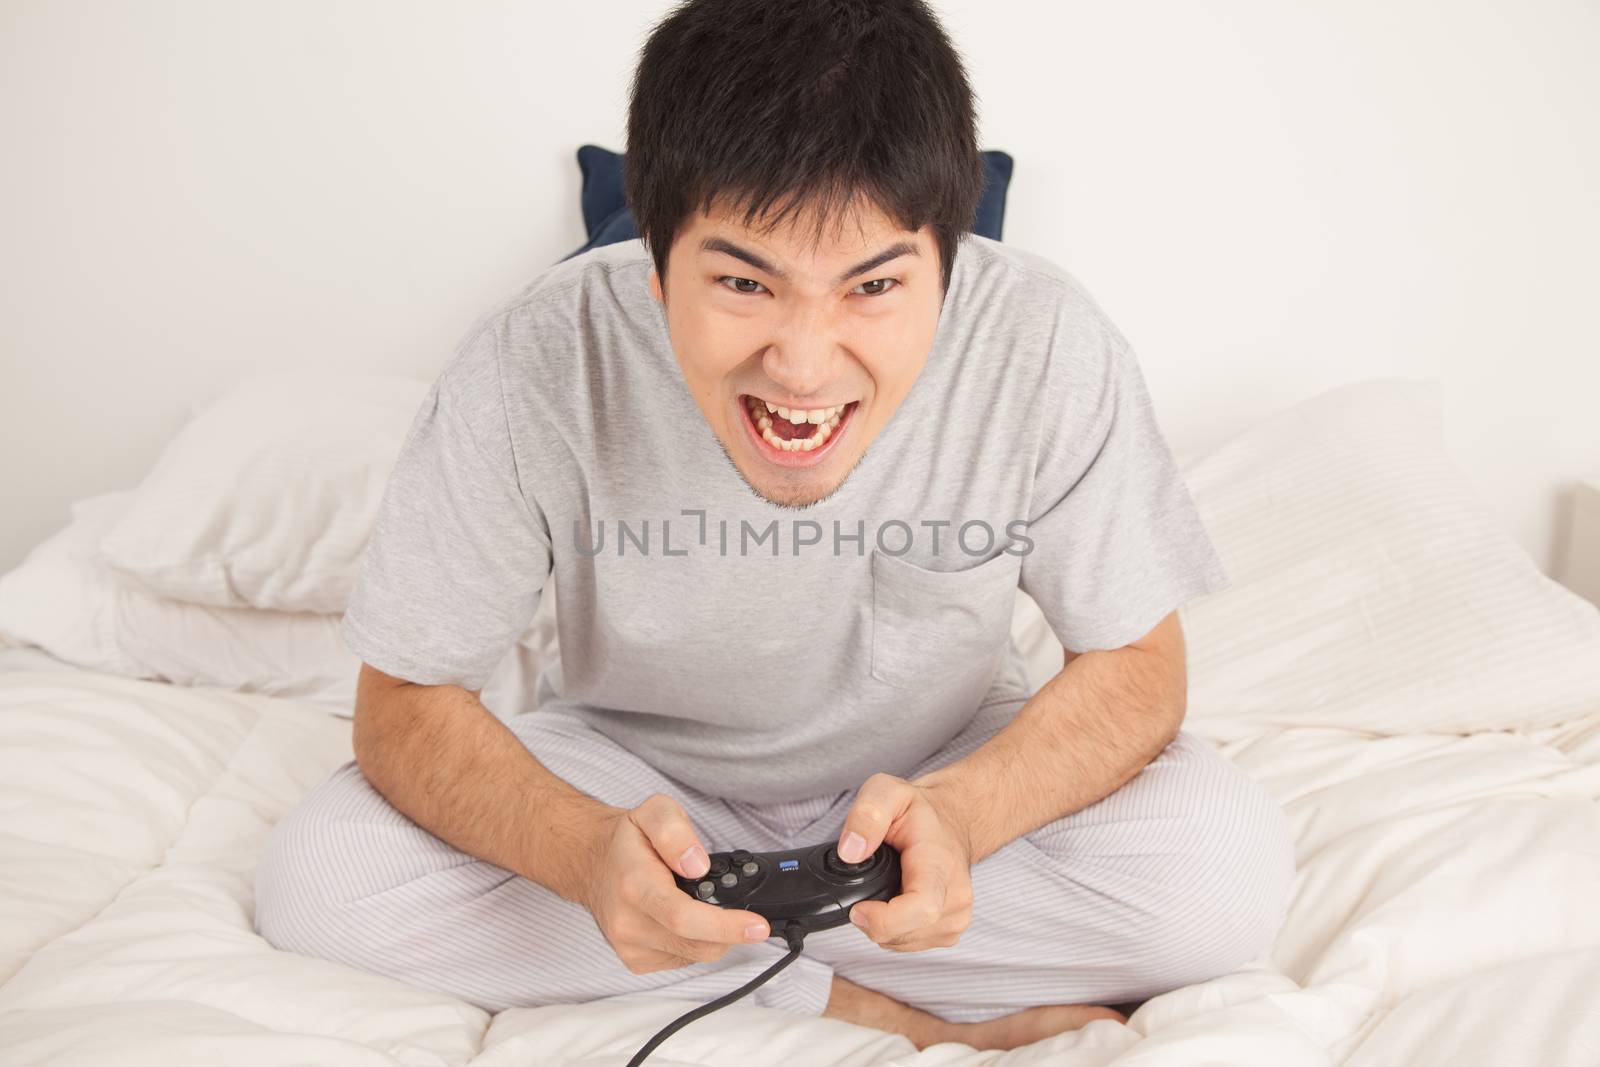 Man playing video games and shouting